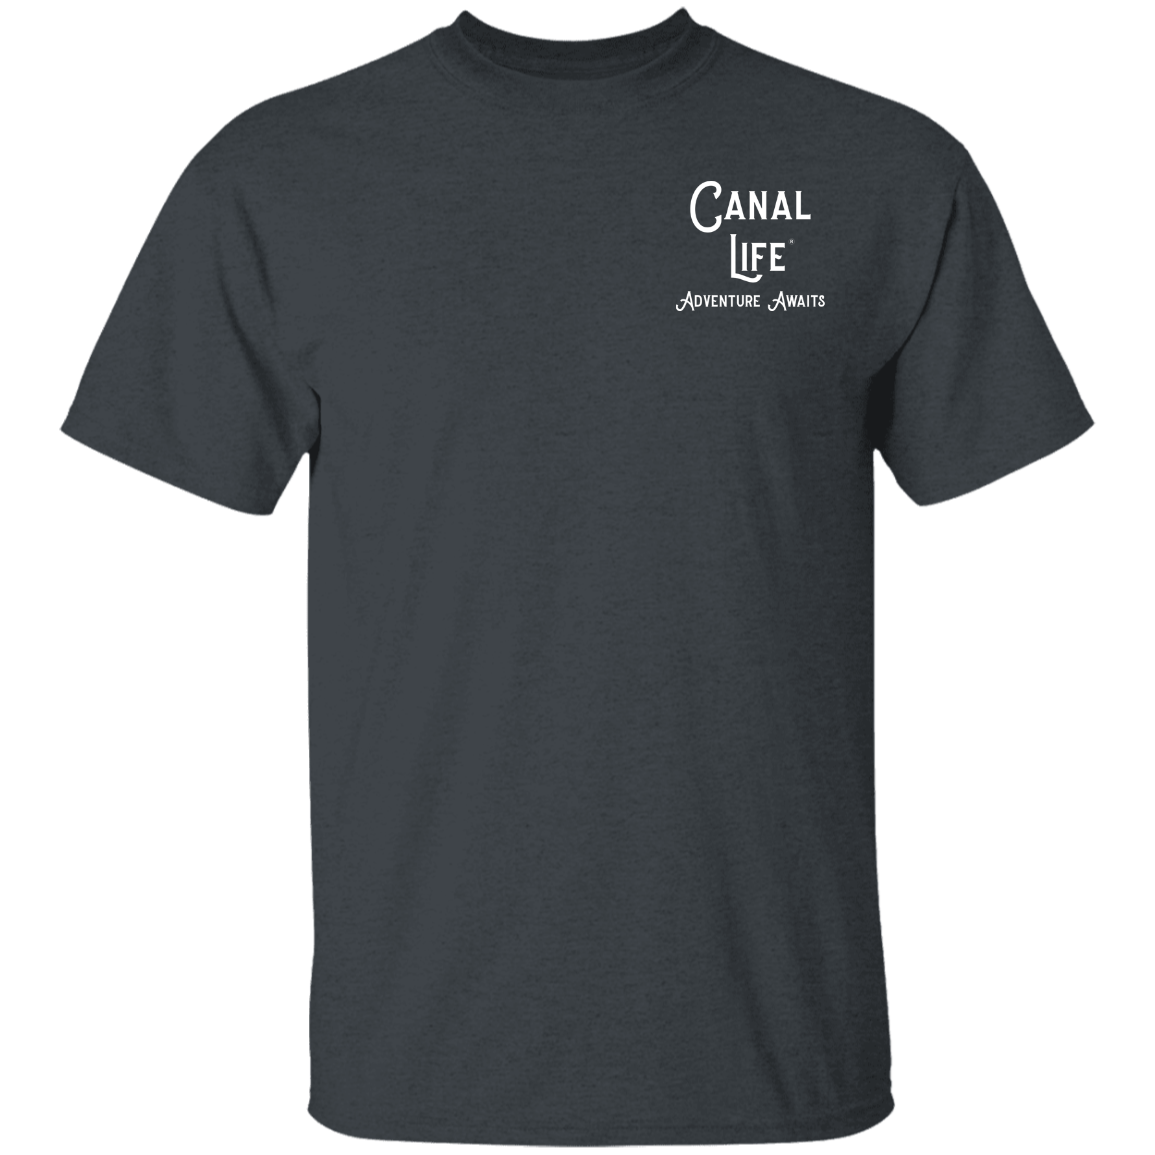 Canal Life Adventure Awaits White Letters on LEFT-Shirt